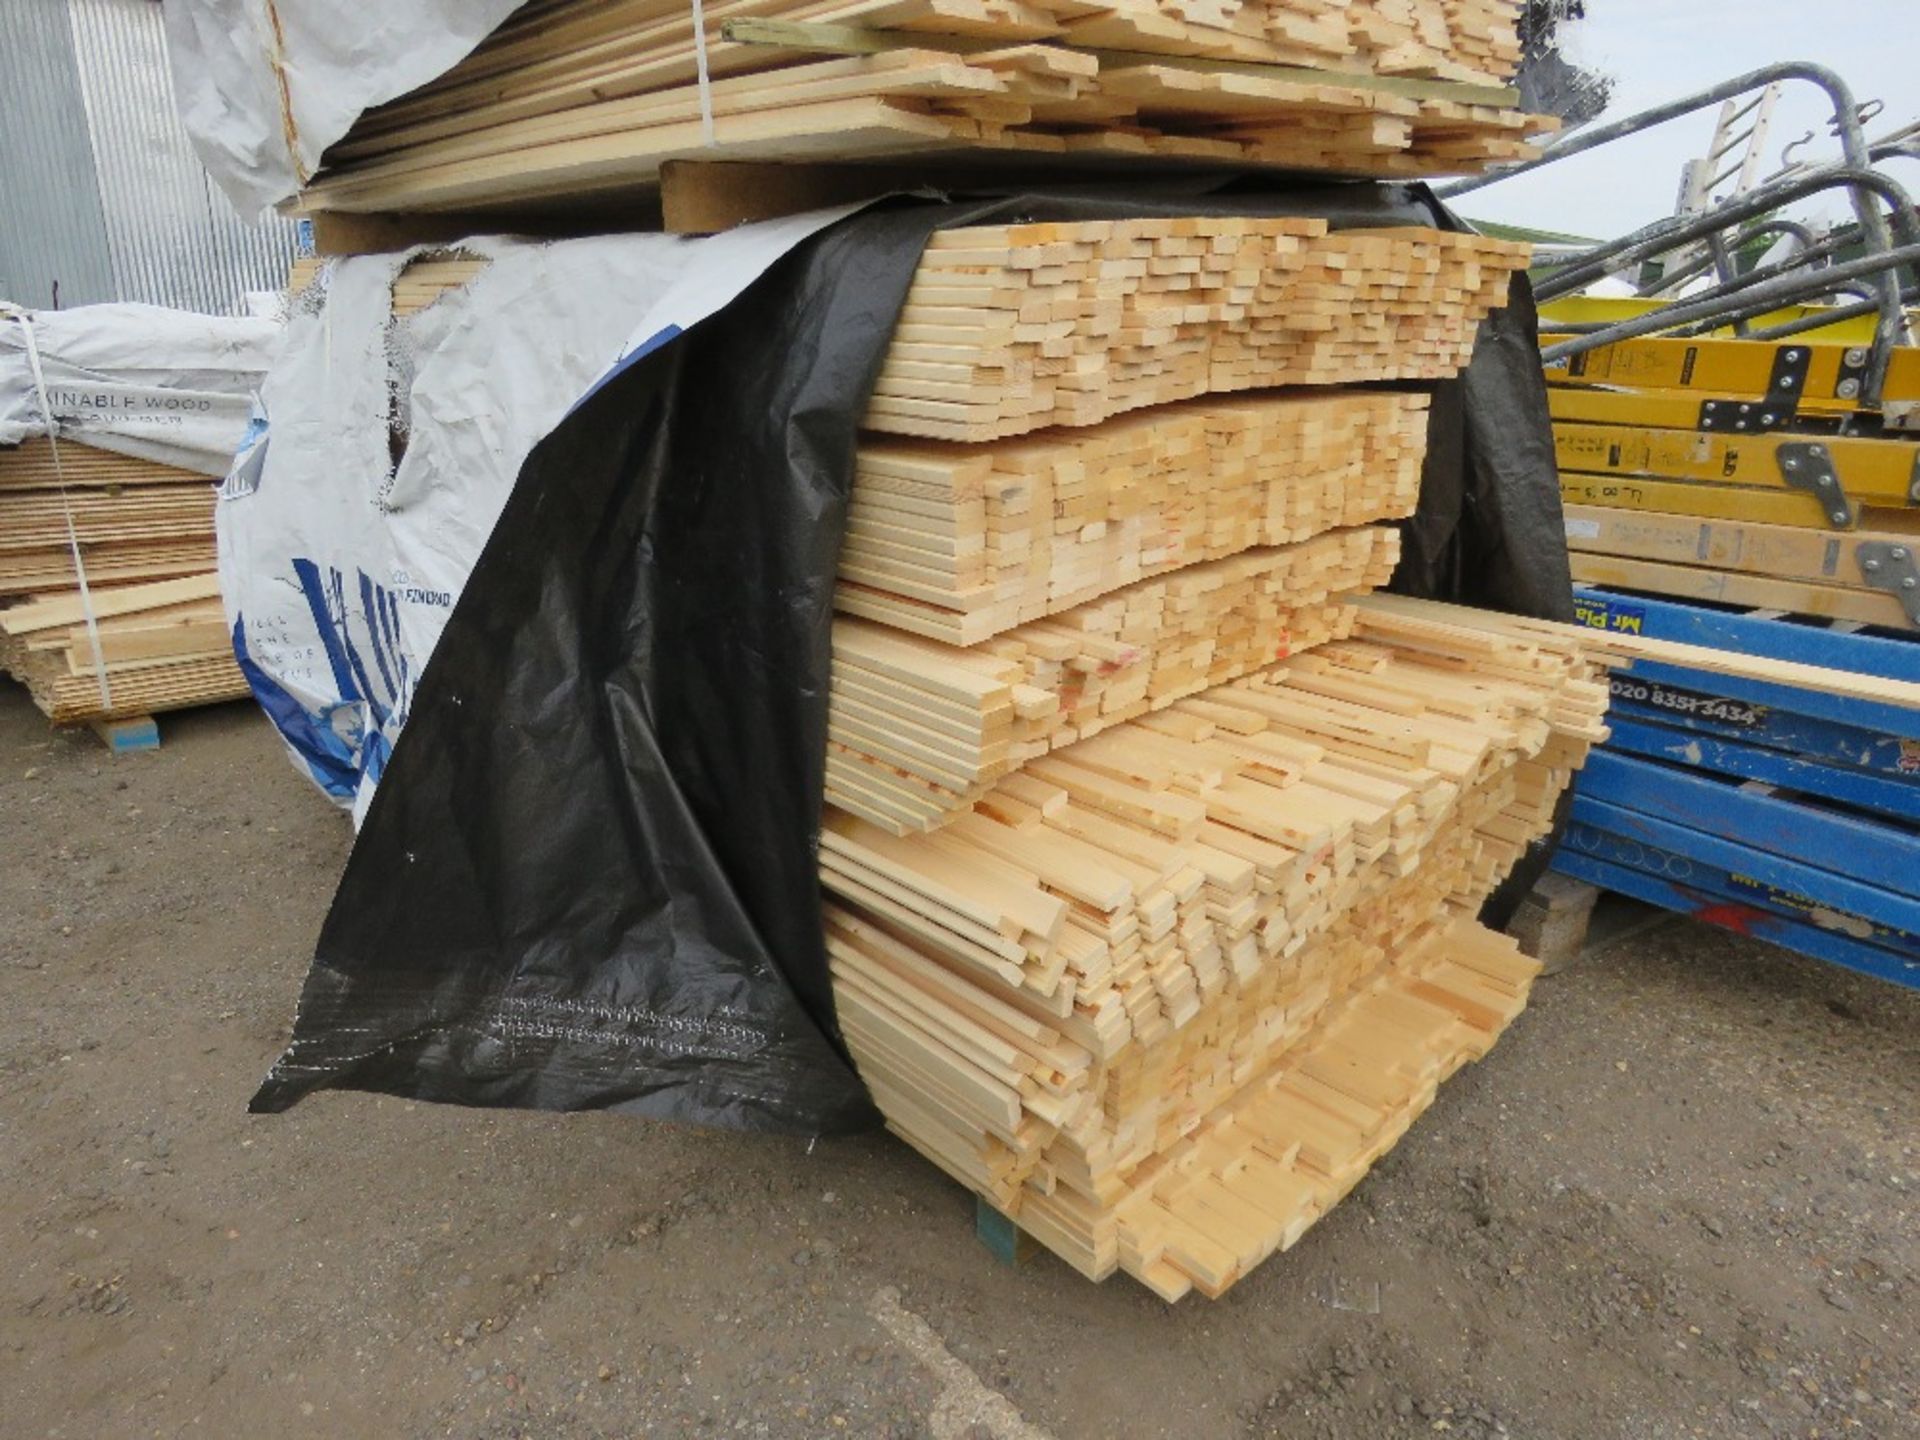 EXTRA LARGE PACK OF UNTREATED VENETIAN PALE FENCE CLADDING/TRELLIS SLATS 2M LENGTH X 45MM X 17MM WID - Image 2 of 3